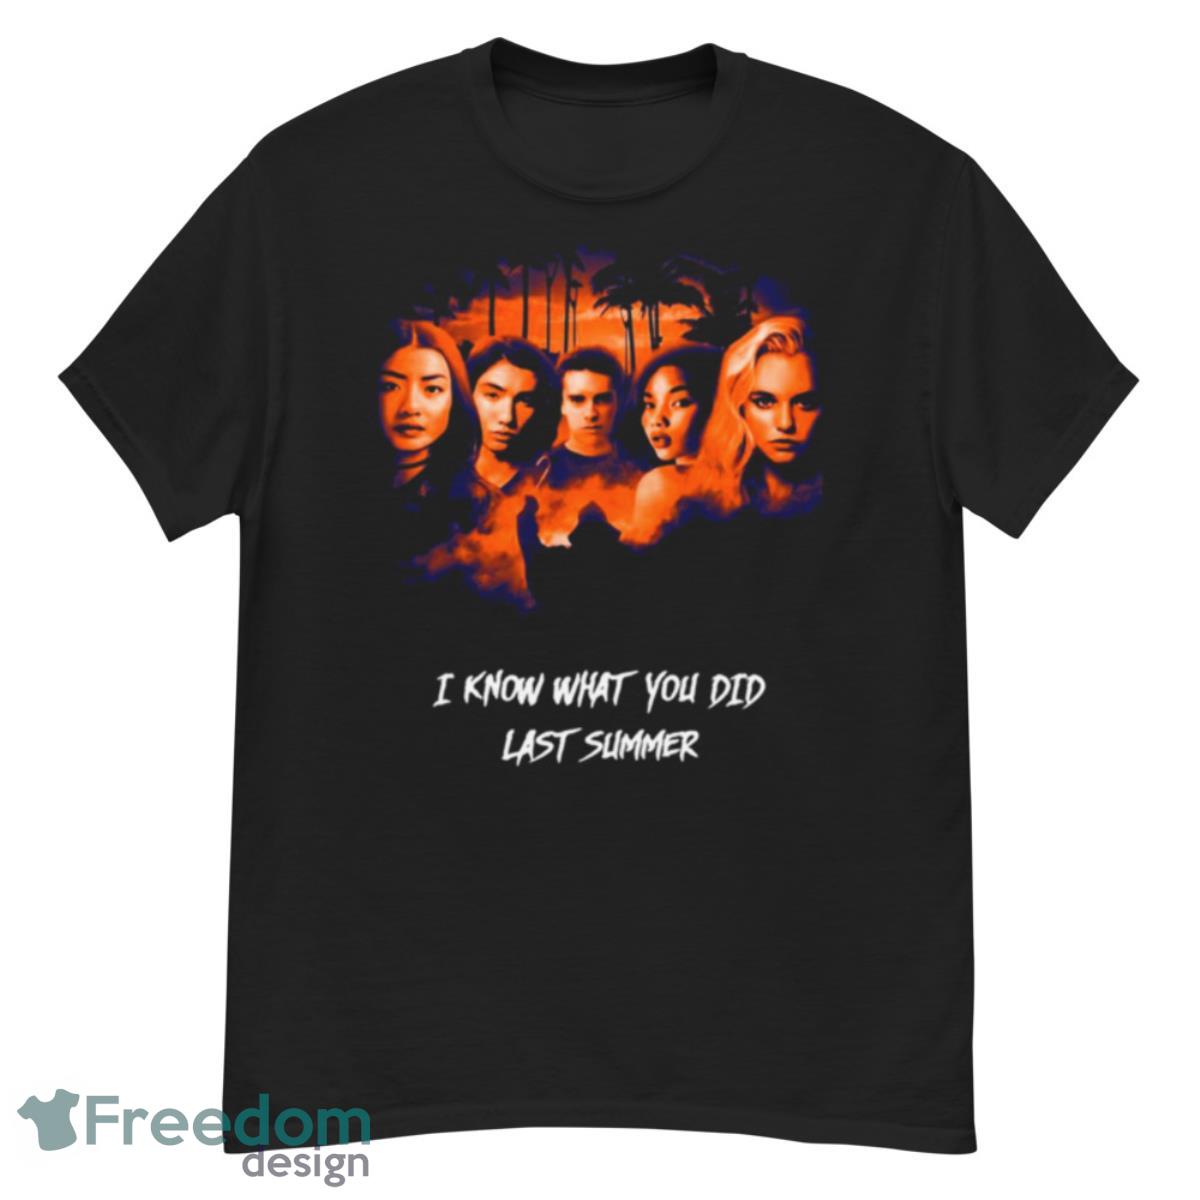 All Characters I Know What You Did Last Summer Drama shirt - G500 Men’s Classic T-Shirt